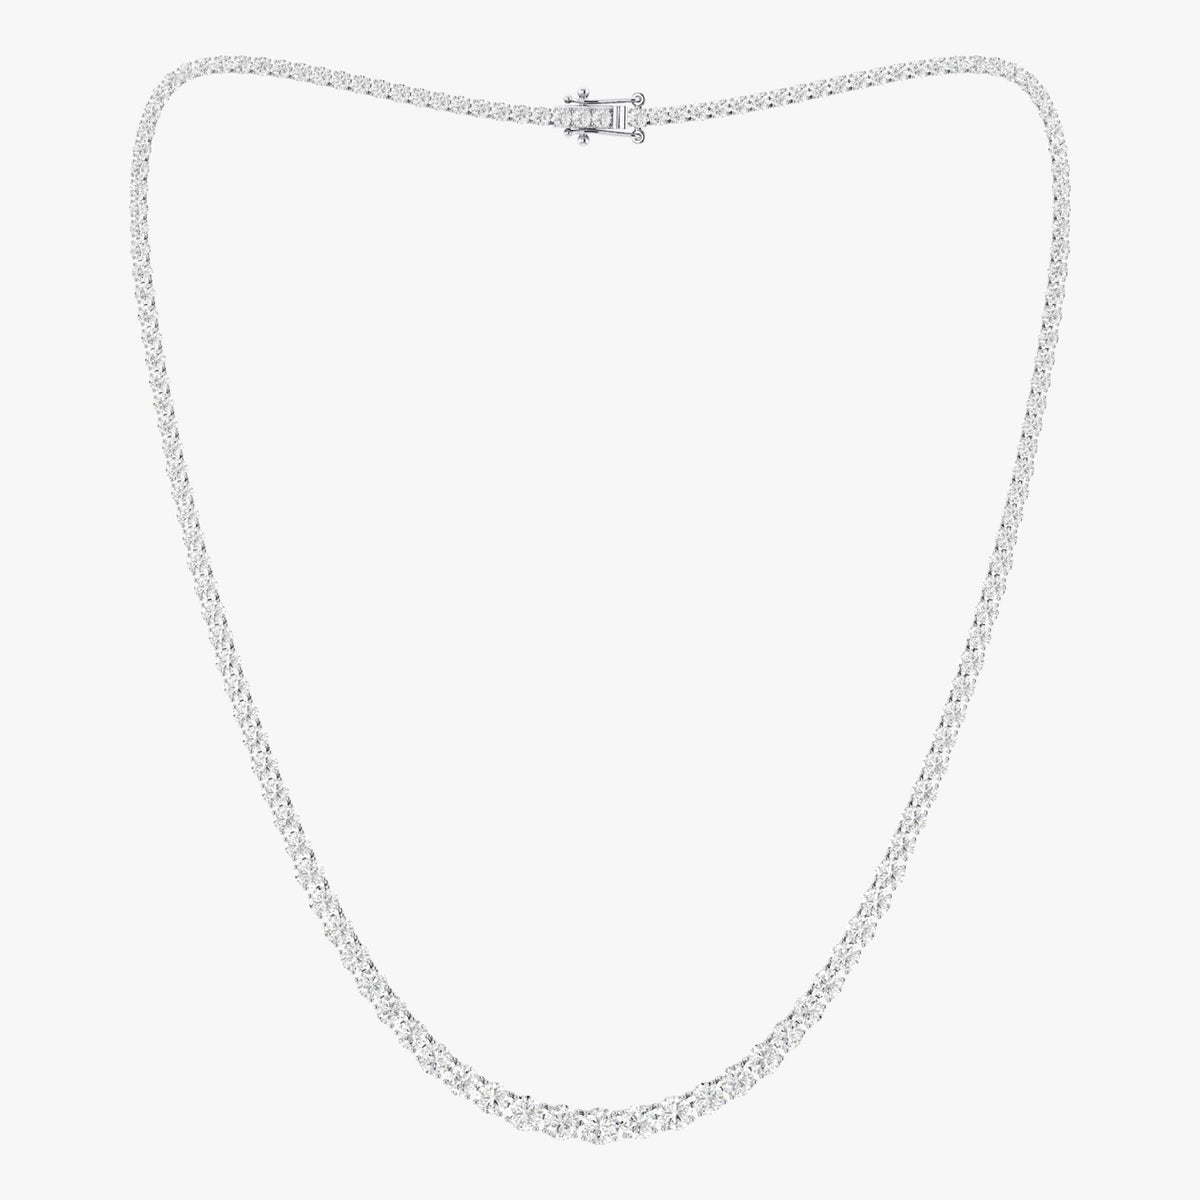 Lab-Grown Diamonds Graduated Tennis Necklace with 16" Gold Chain 8 to 27 Carat TW, E-F Color, VS Clarity) Prong Setting